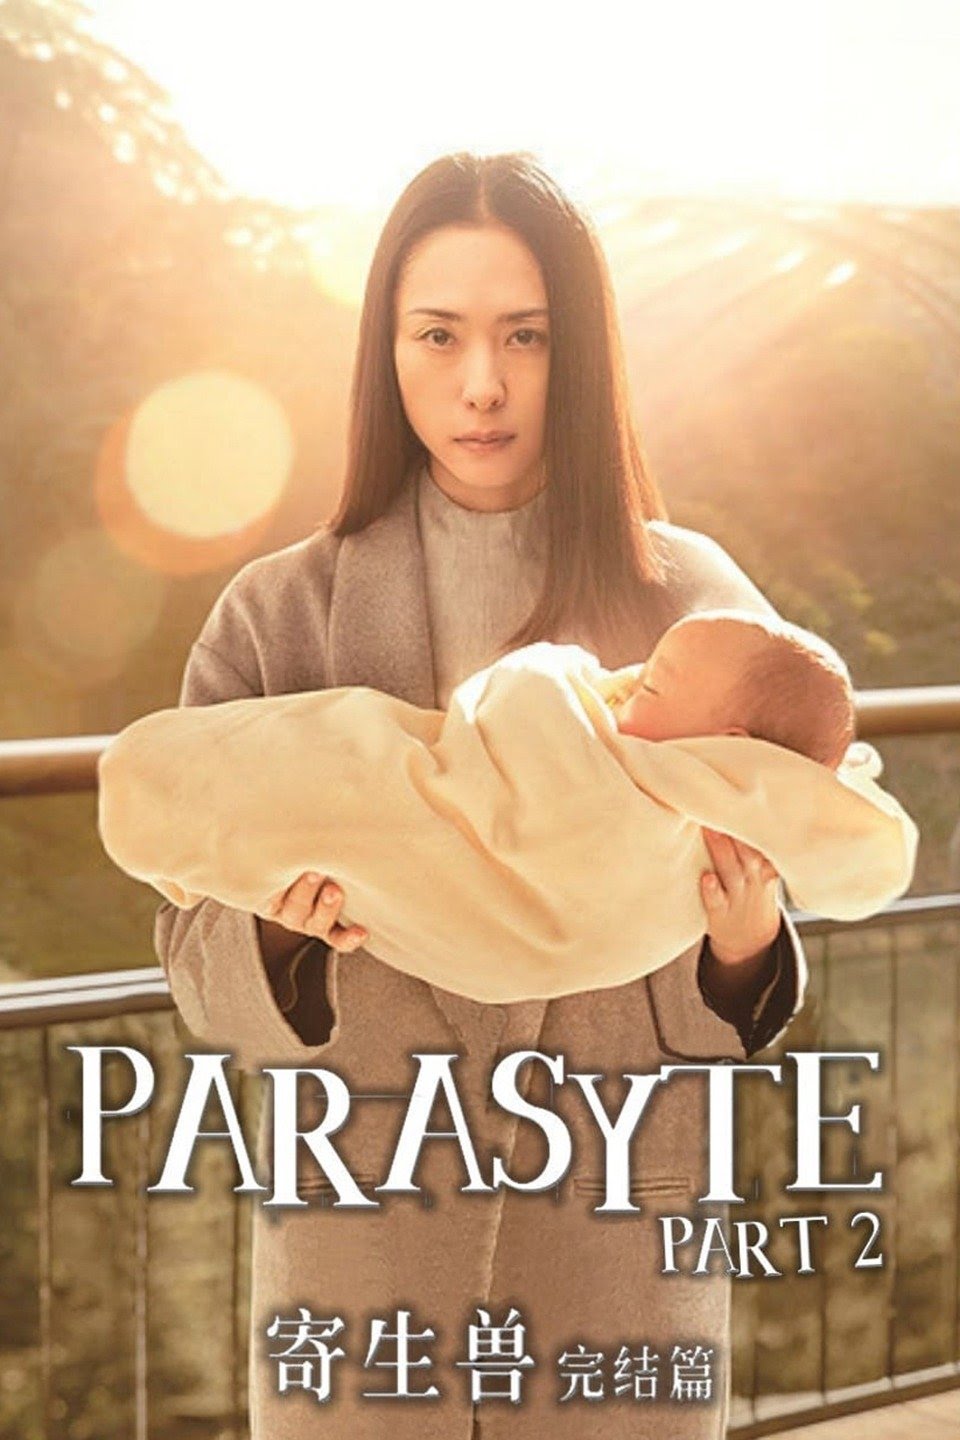 Download Parasyte: Part 2 (2015) {Japanese With English Subtitles} BluRay 480p | 720p 